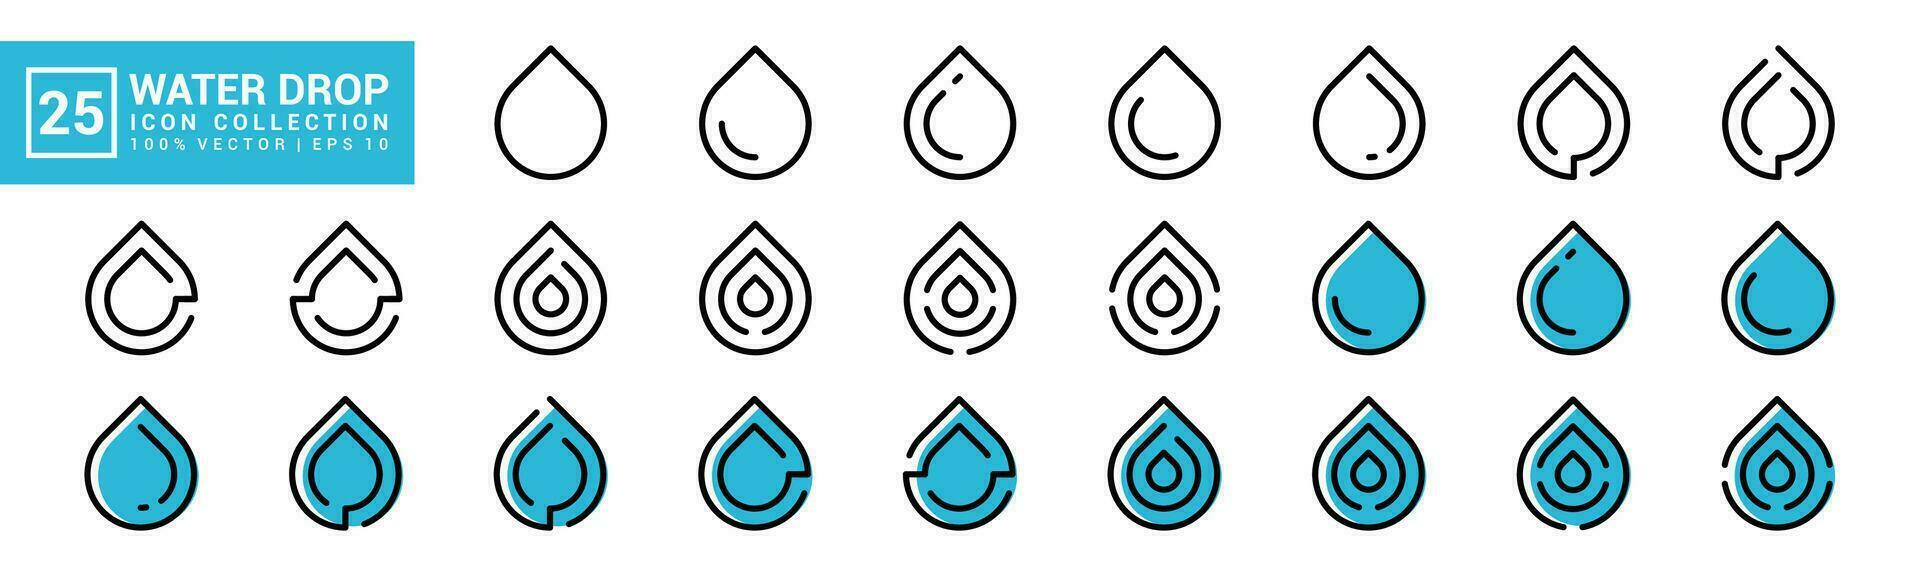 Icon collection of water drop, liquid, oil, lubricant, editable and resizable EPS 10. vector